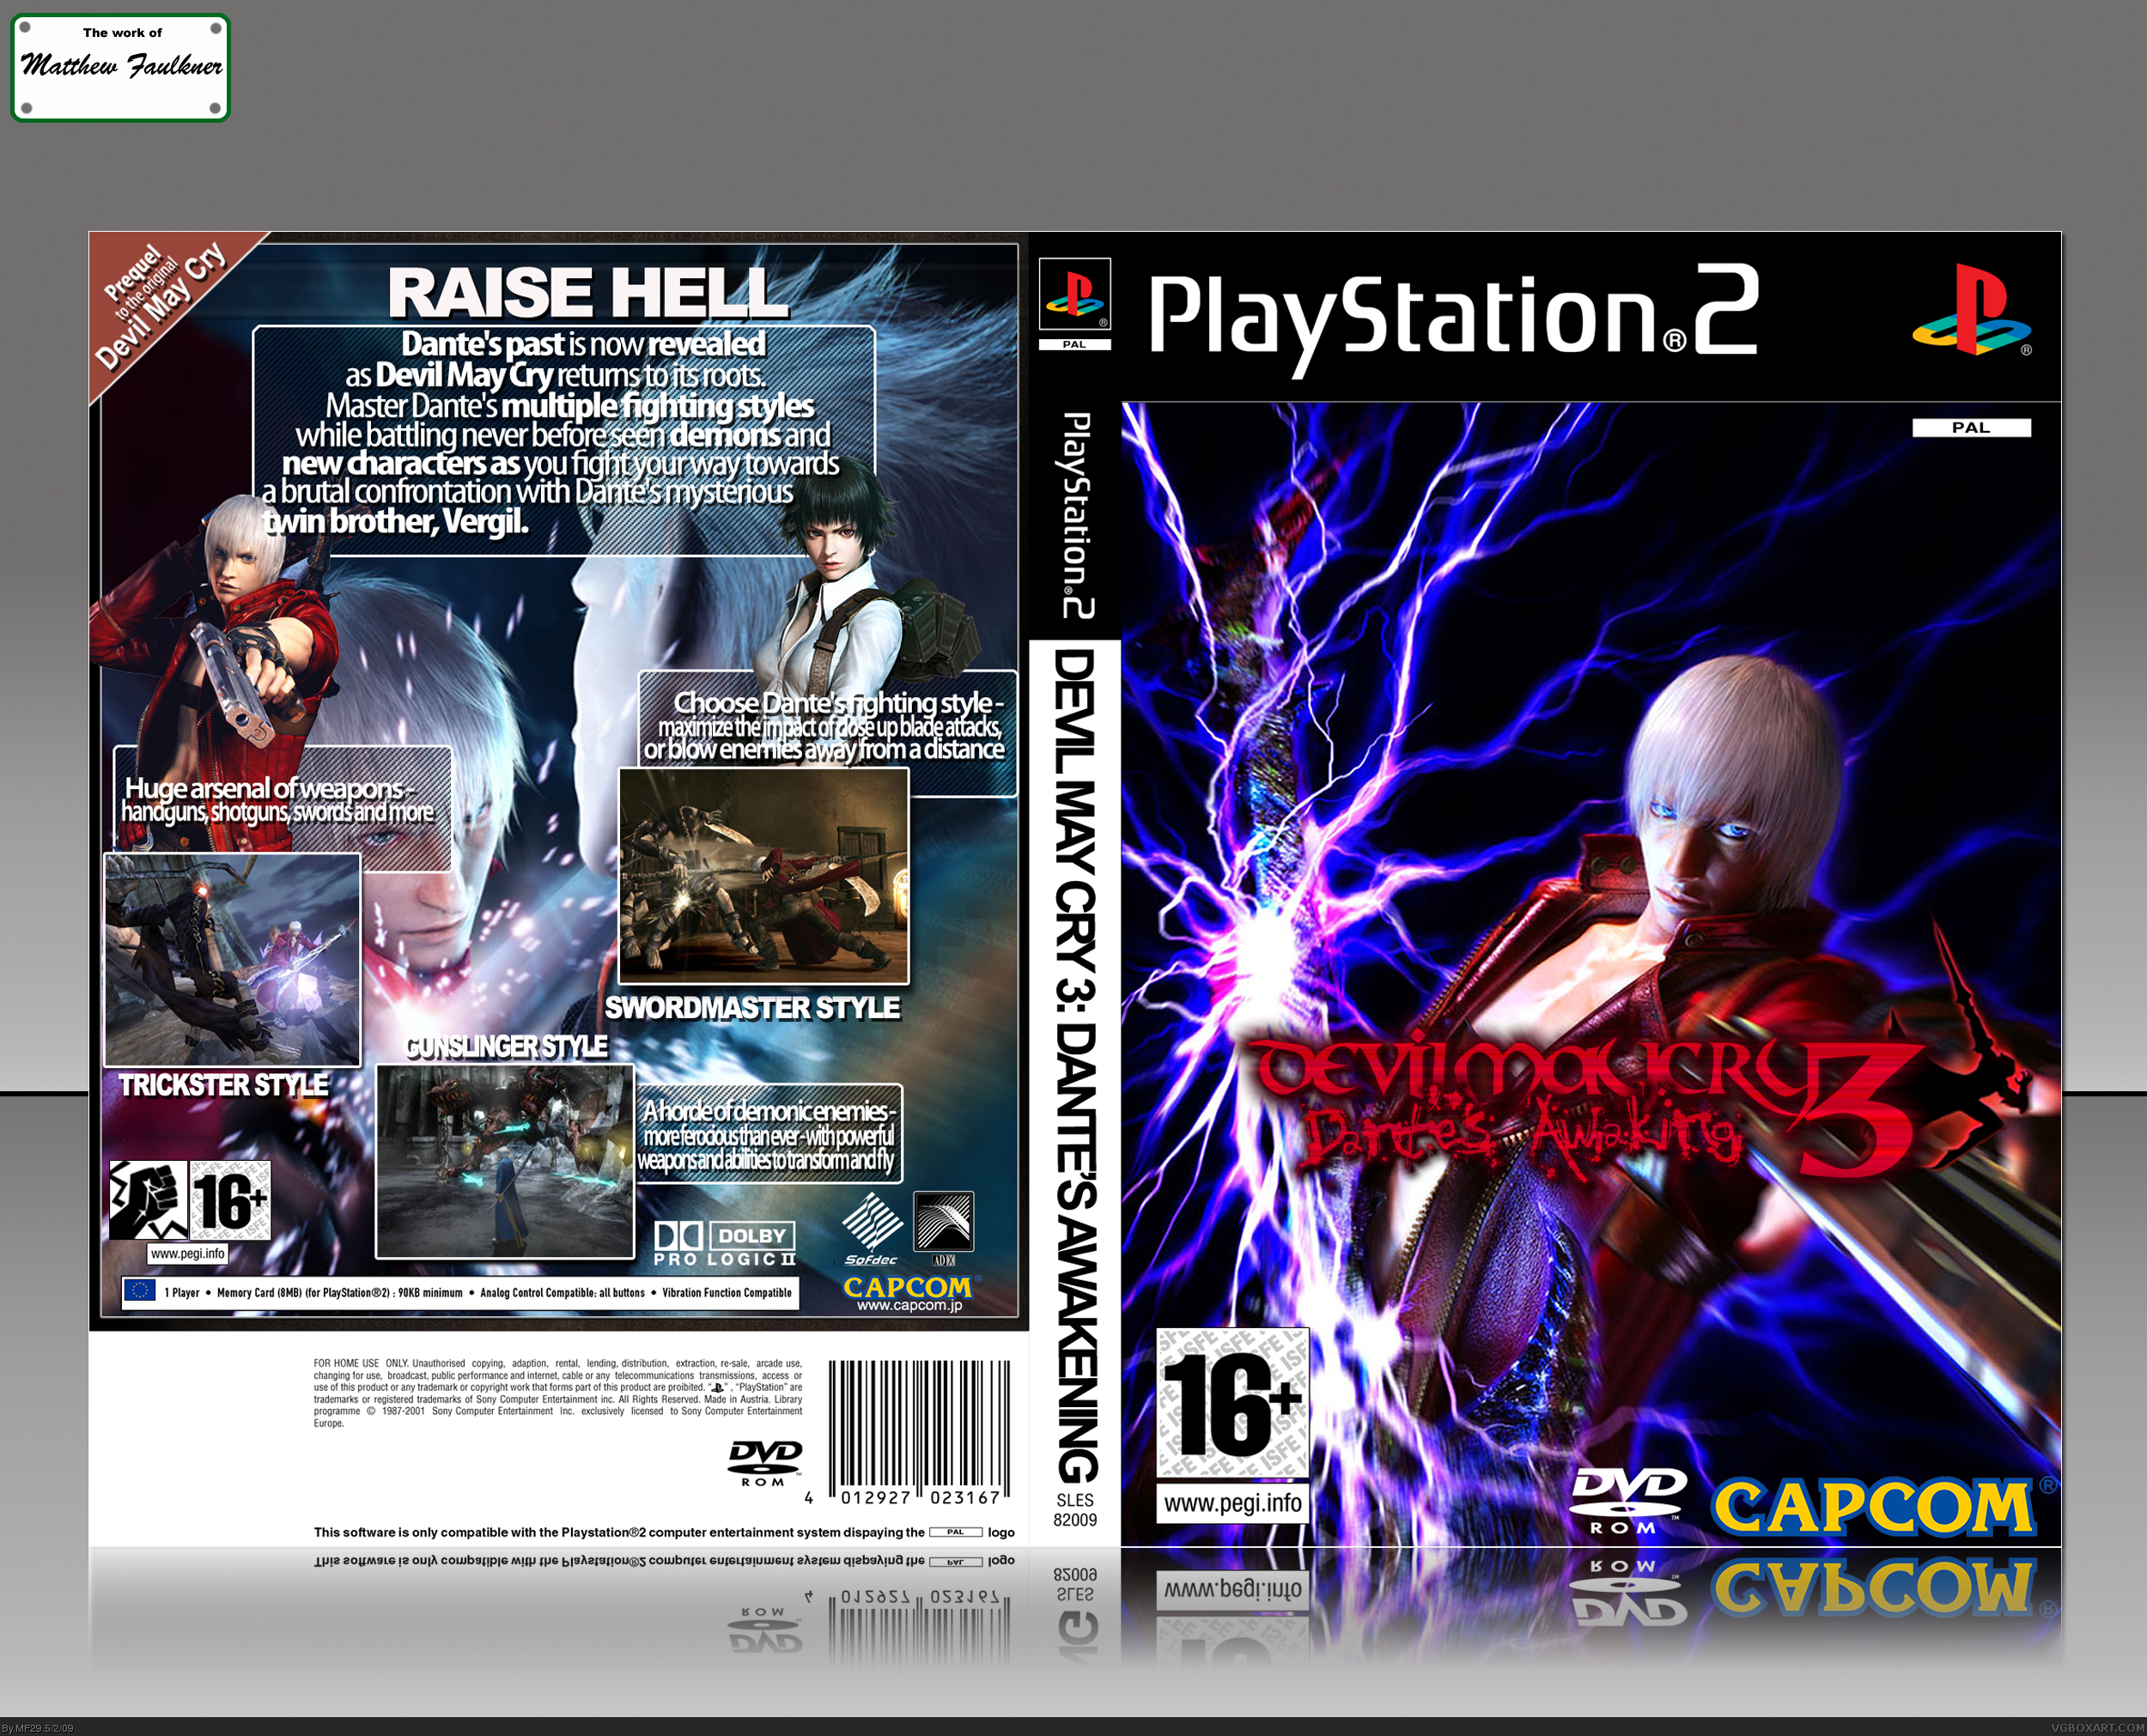 Devil May Cry 3 box cover